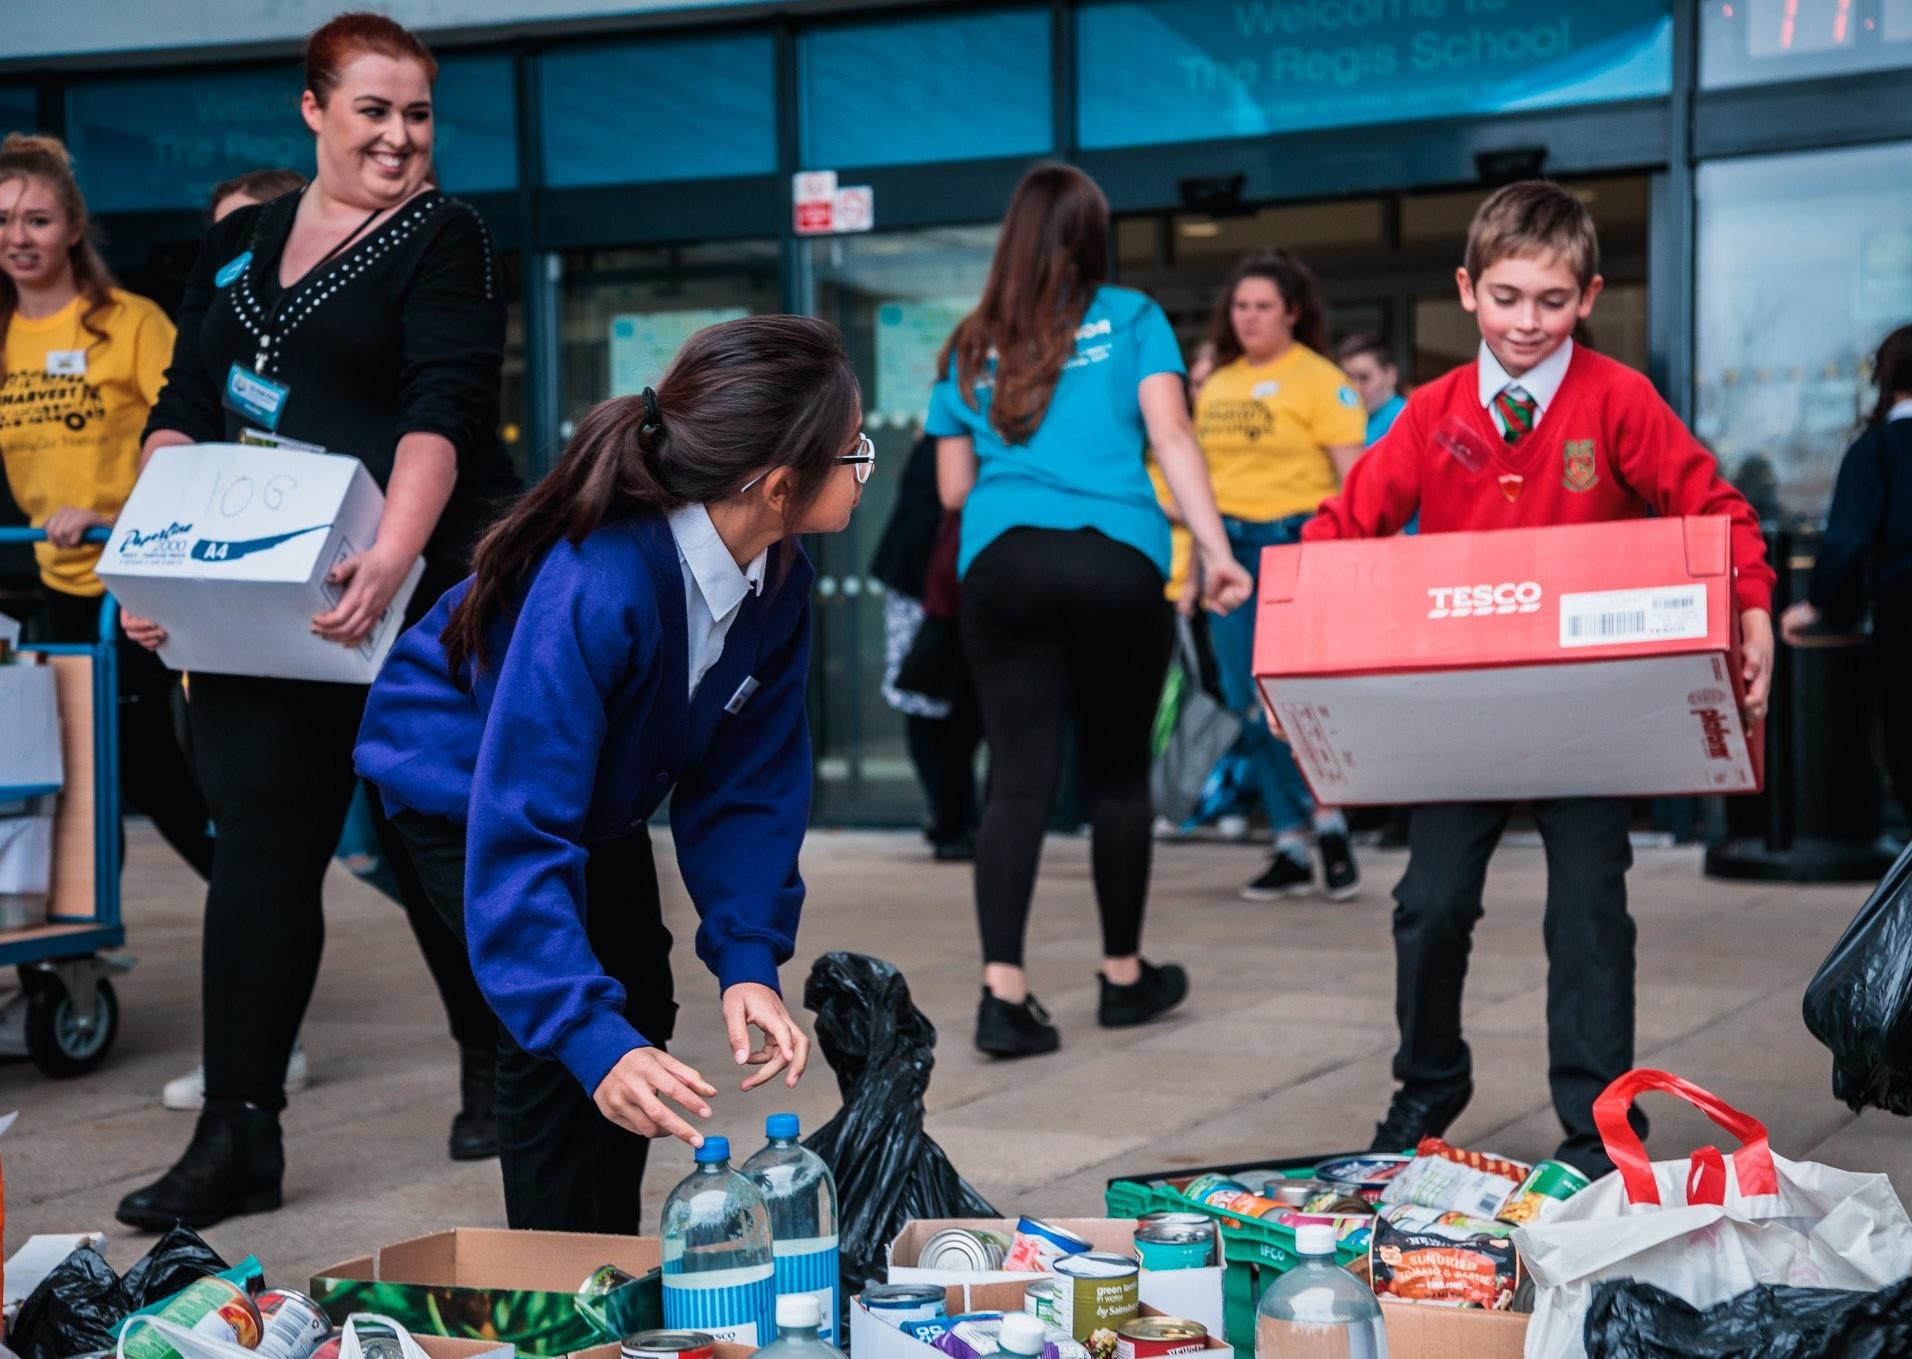 Students sorting the food donations